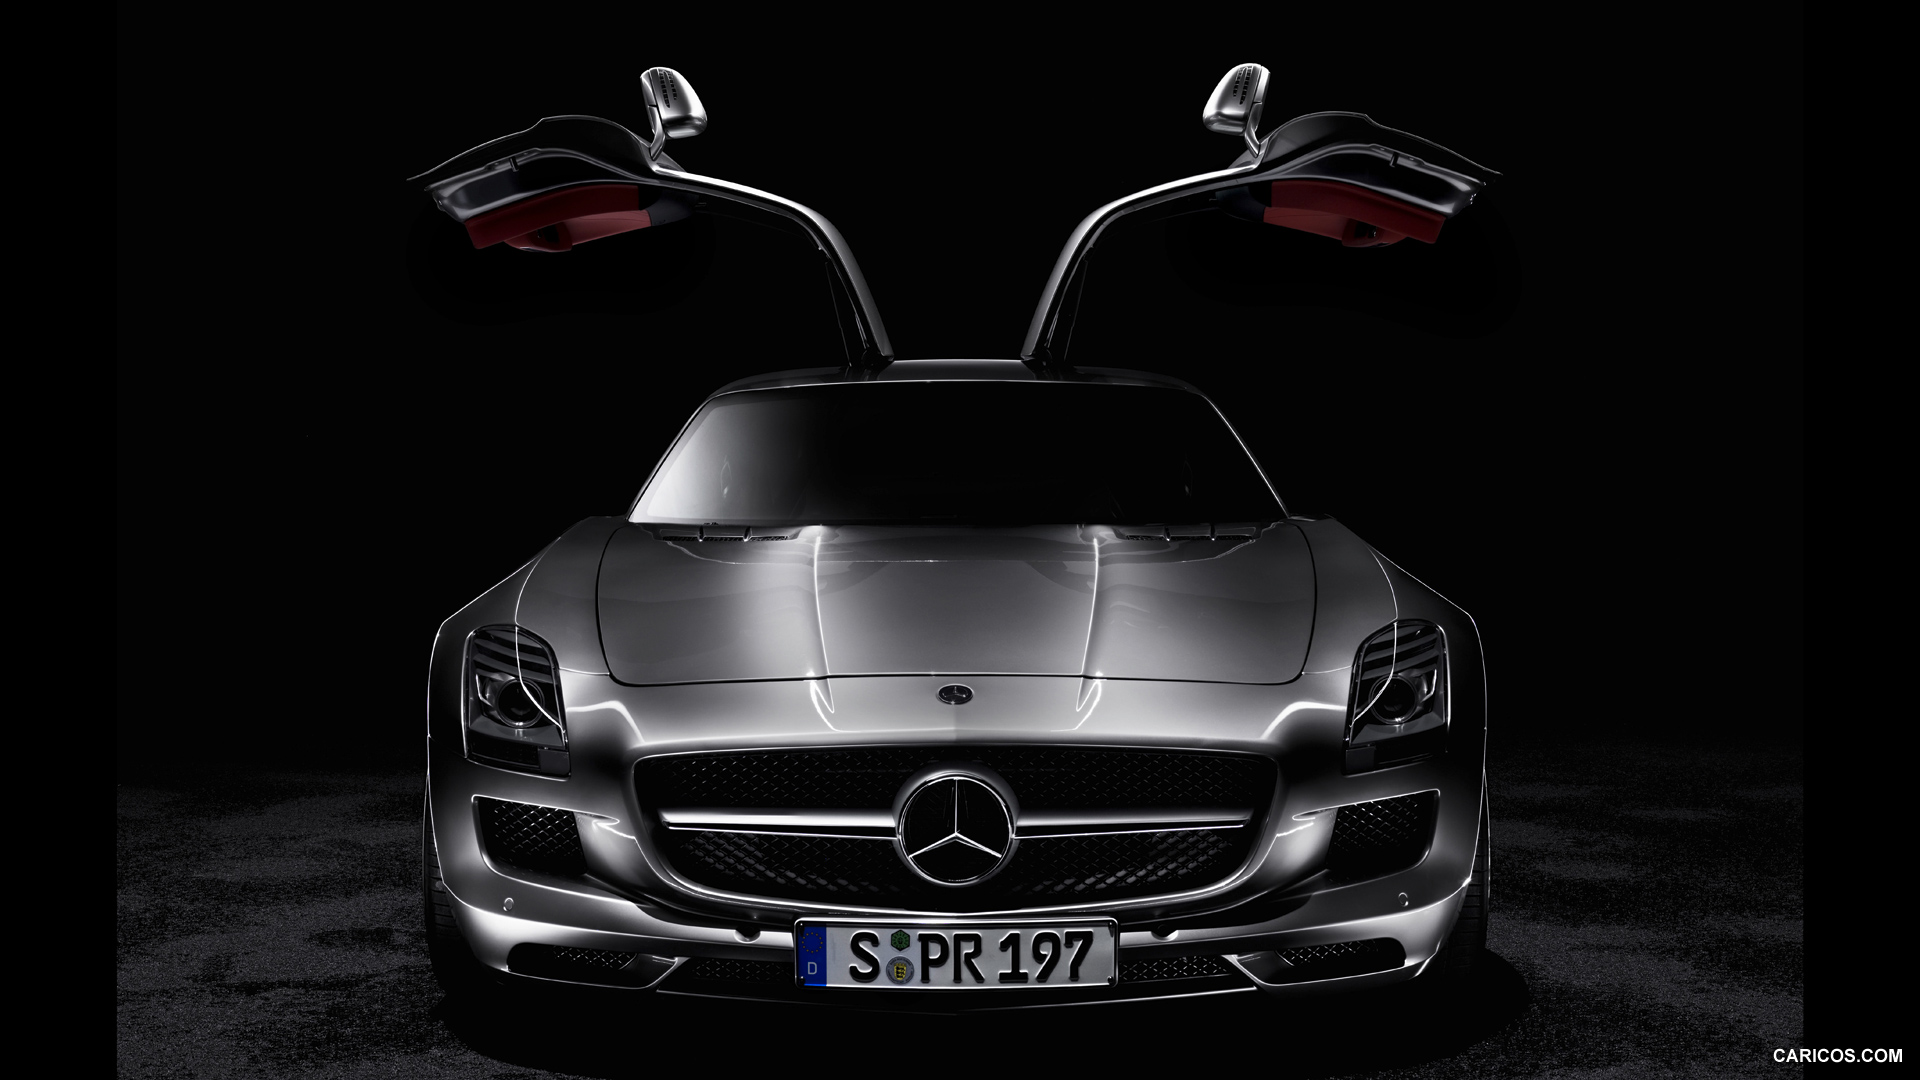 2010 Mercedes-Benz SLS AMG Gullwing - Doors Open - Front Angle , #141 of 148